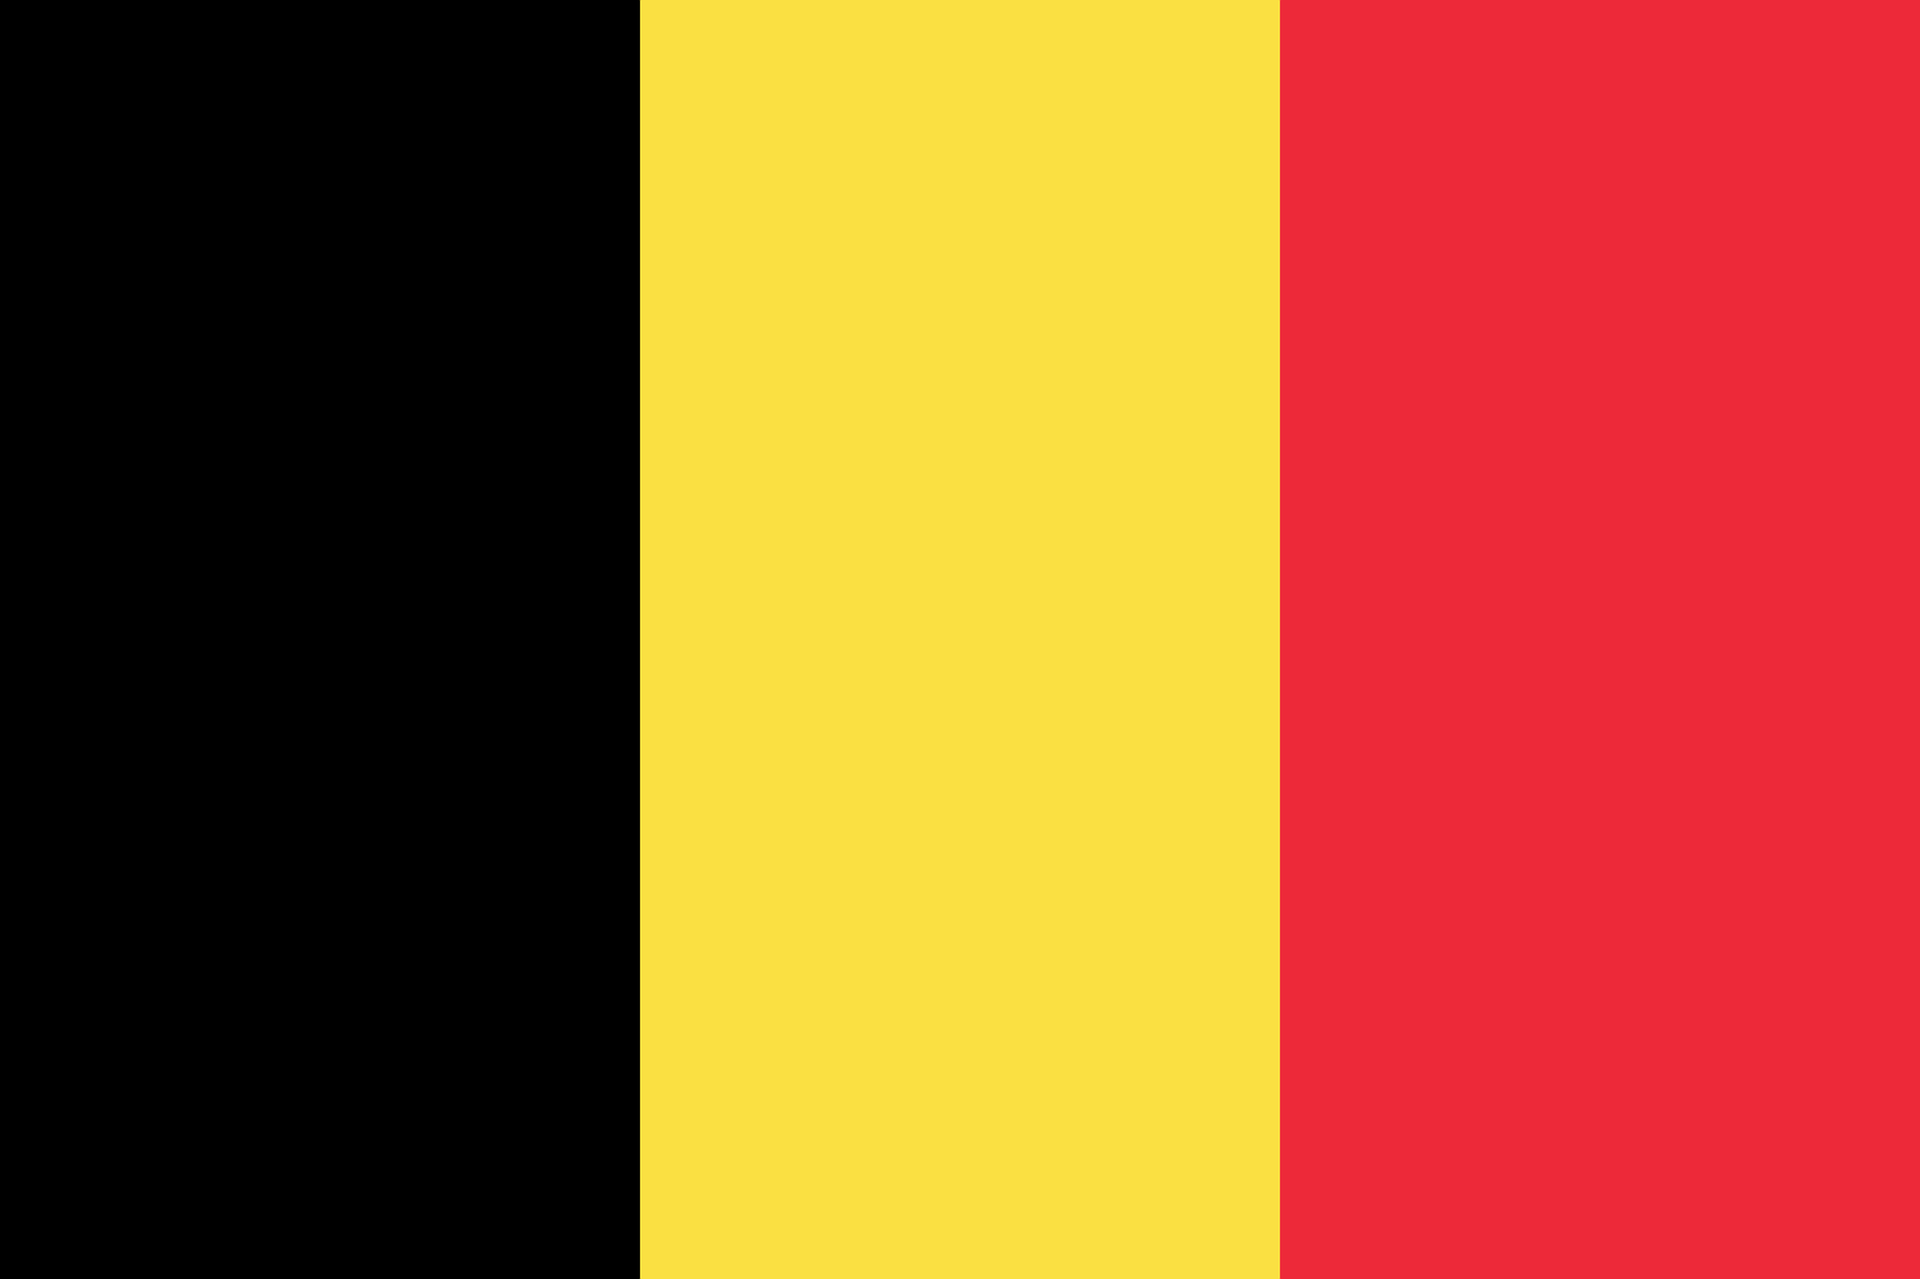 Belgium: Val-i-pac packaging compliance update